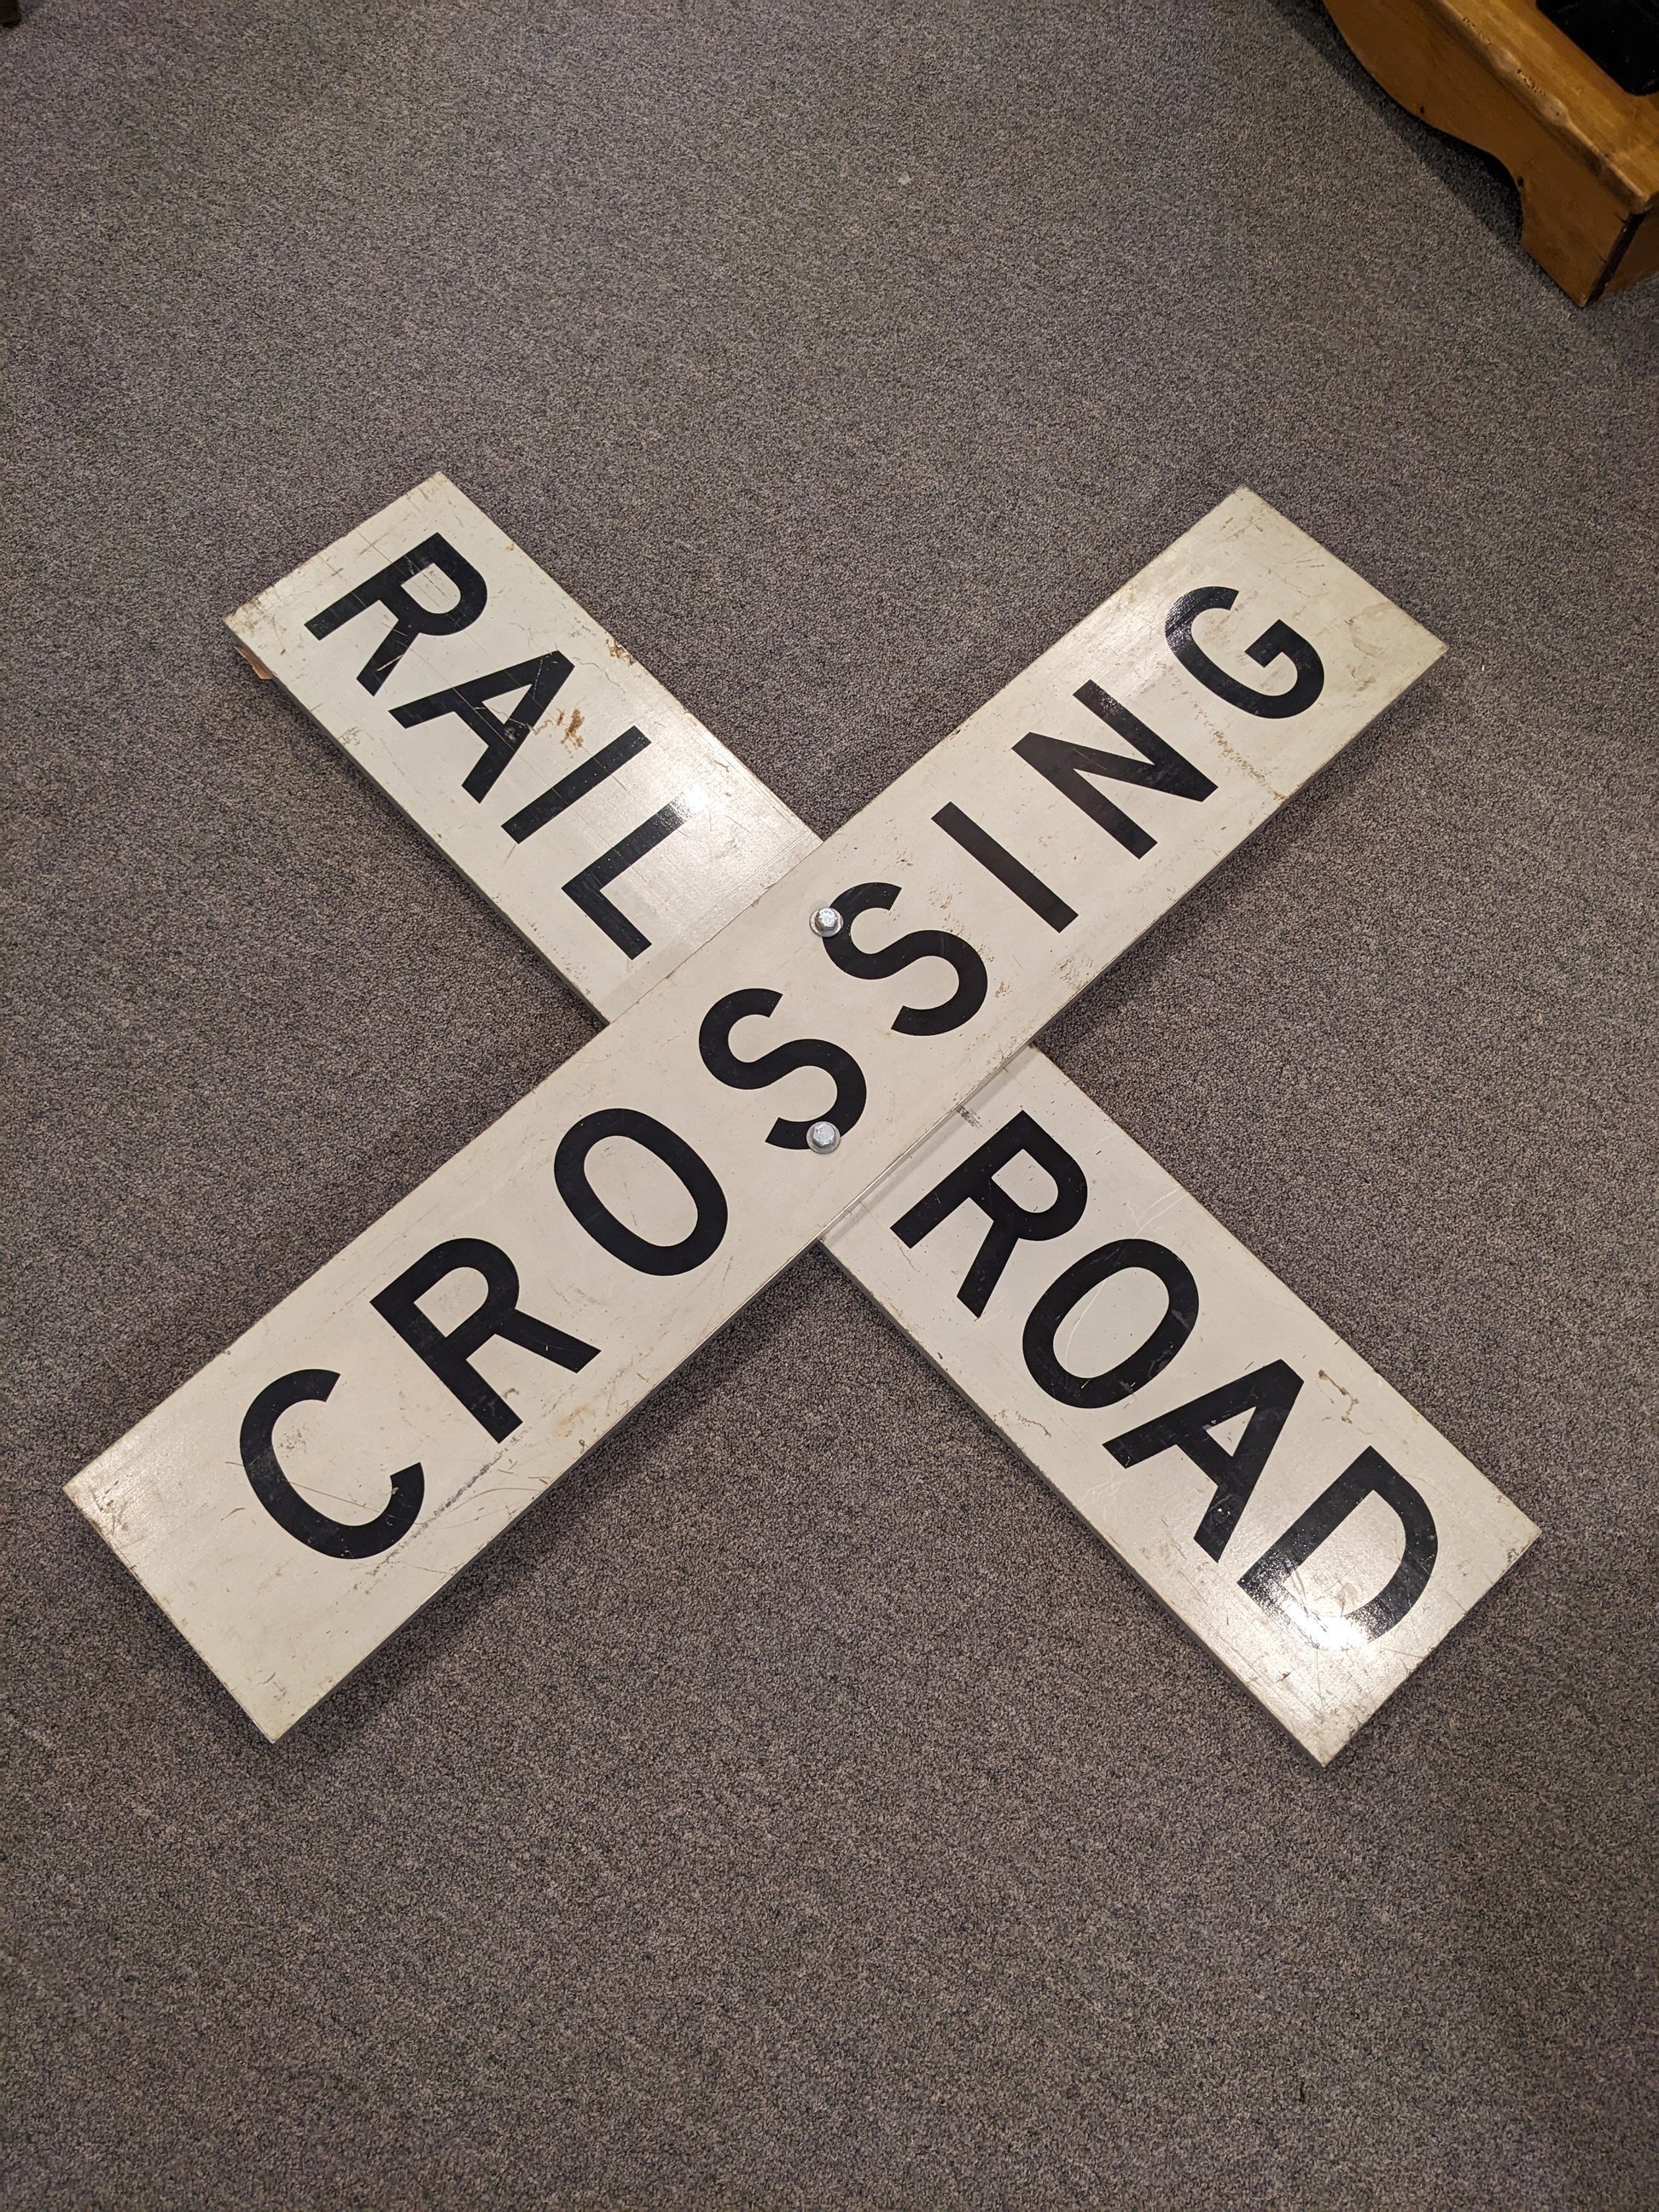 Retired Railroad Crossing Sign